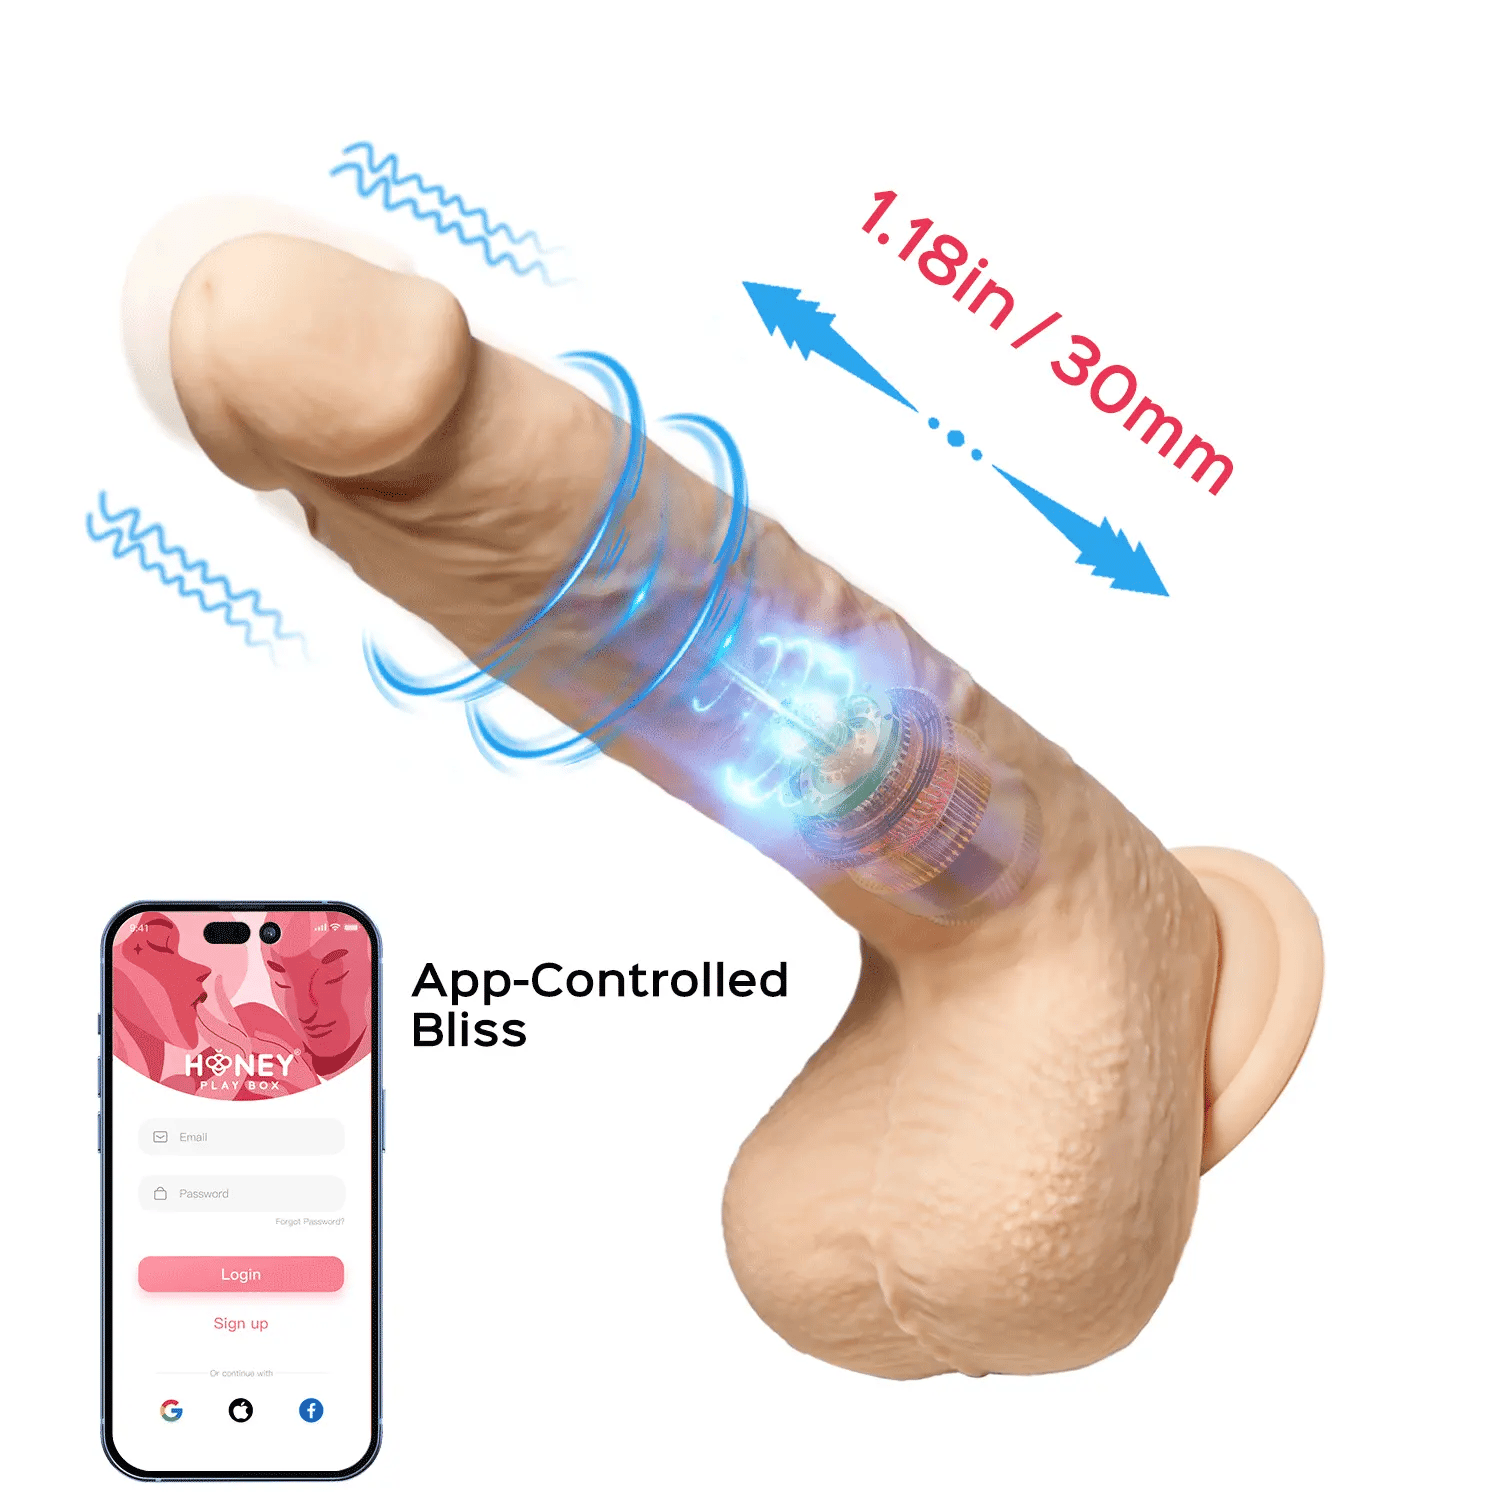 LUIS App-controlled 8.5 Inch Realistic Thrusting Dildo Vibrator - Honey Play Box Official